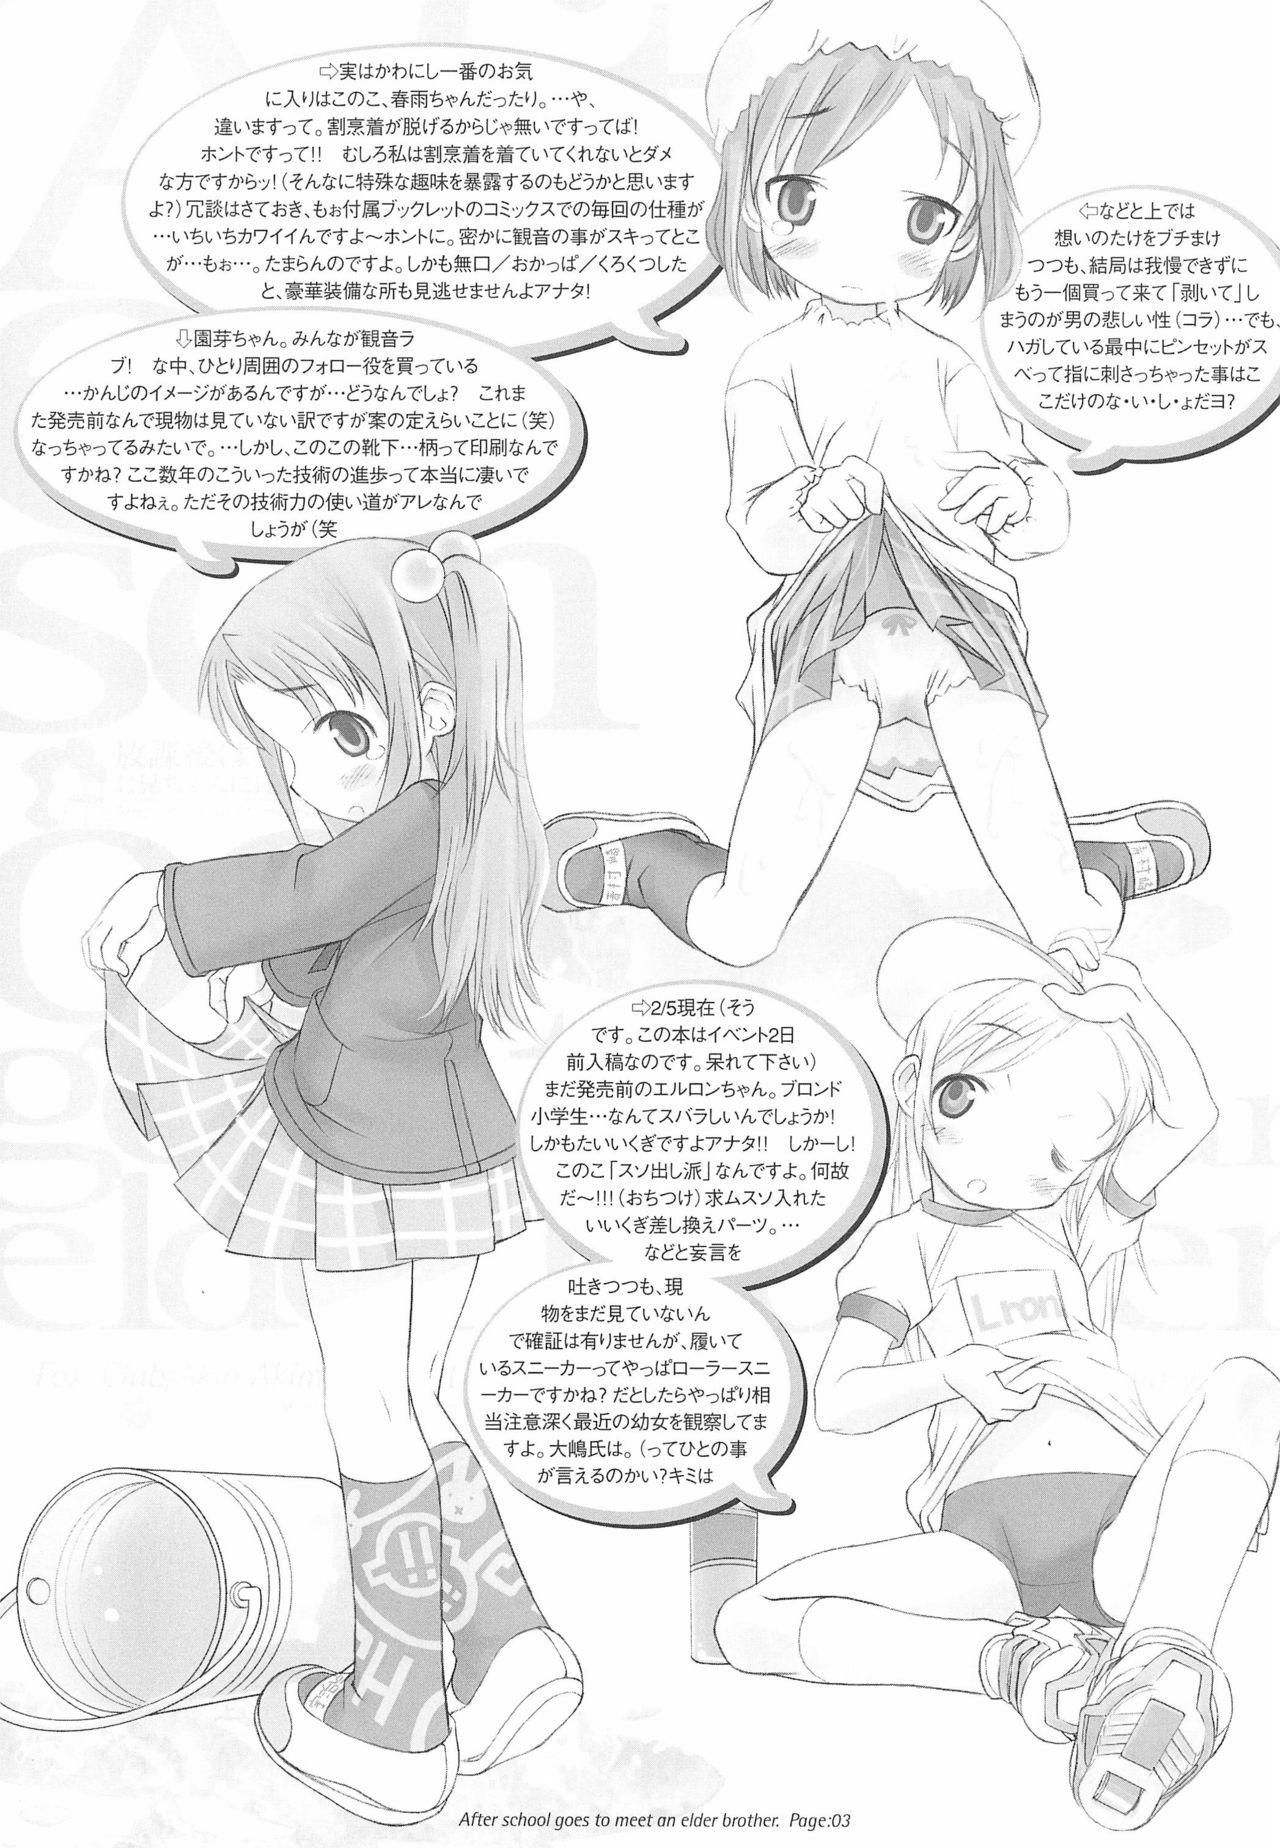 Skype After School Goes To Meet An Elder Brother - Shuukan watashi no onii chan | weekly dearest my brother Doublepenetration - Page 3